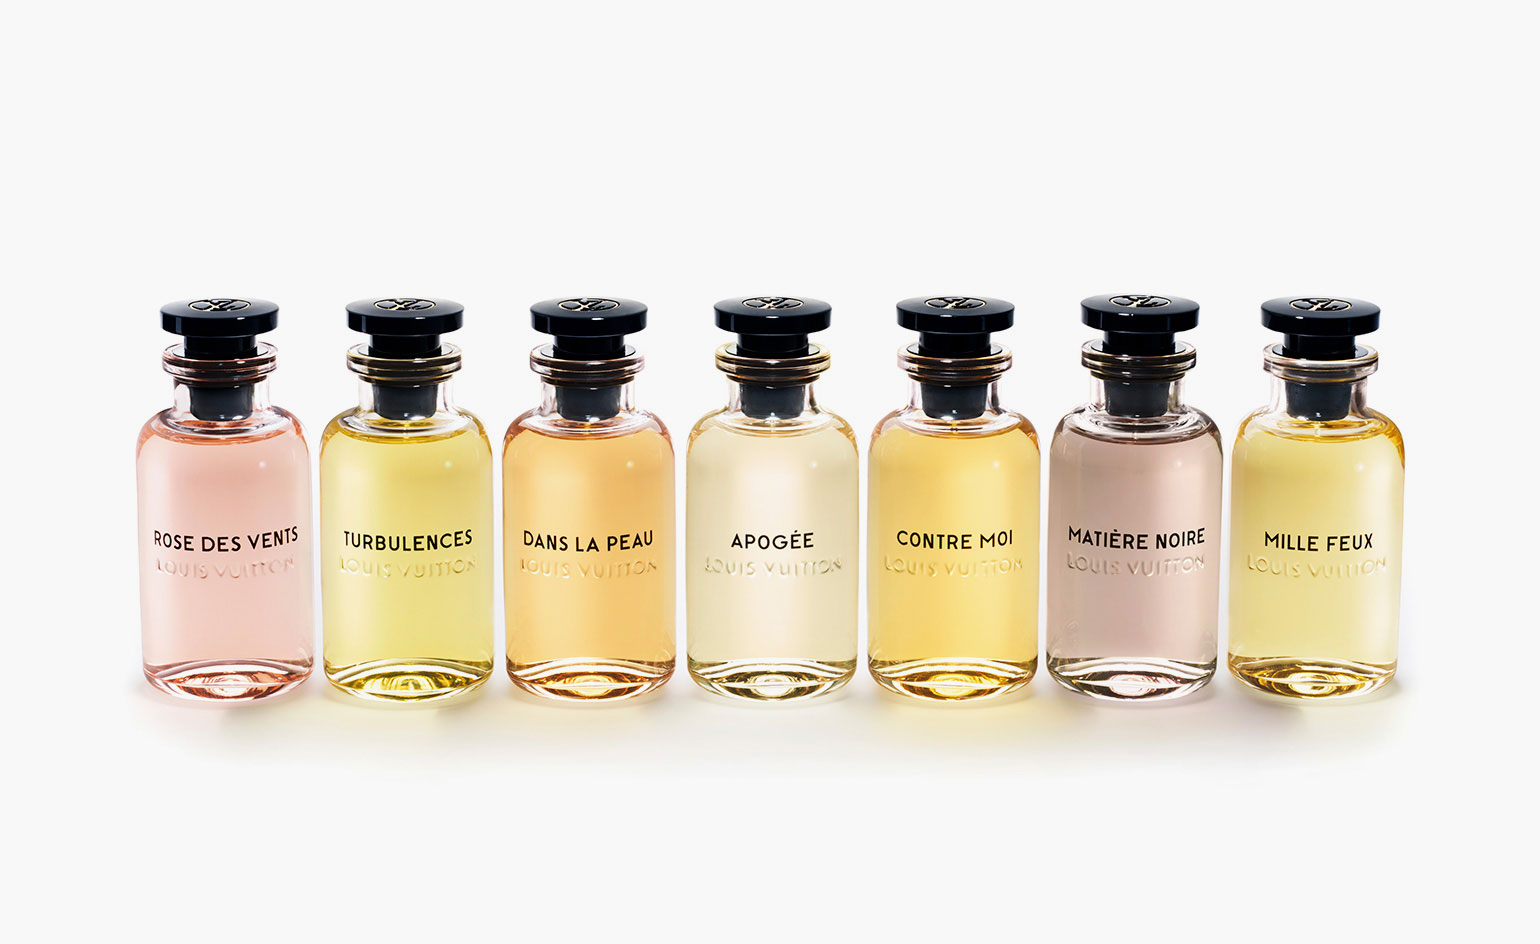 Louis Vuitton welcomes new chapter to perfume collection